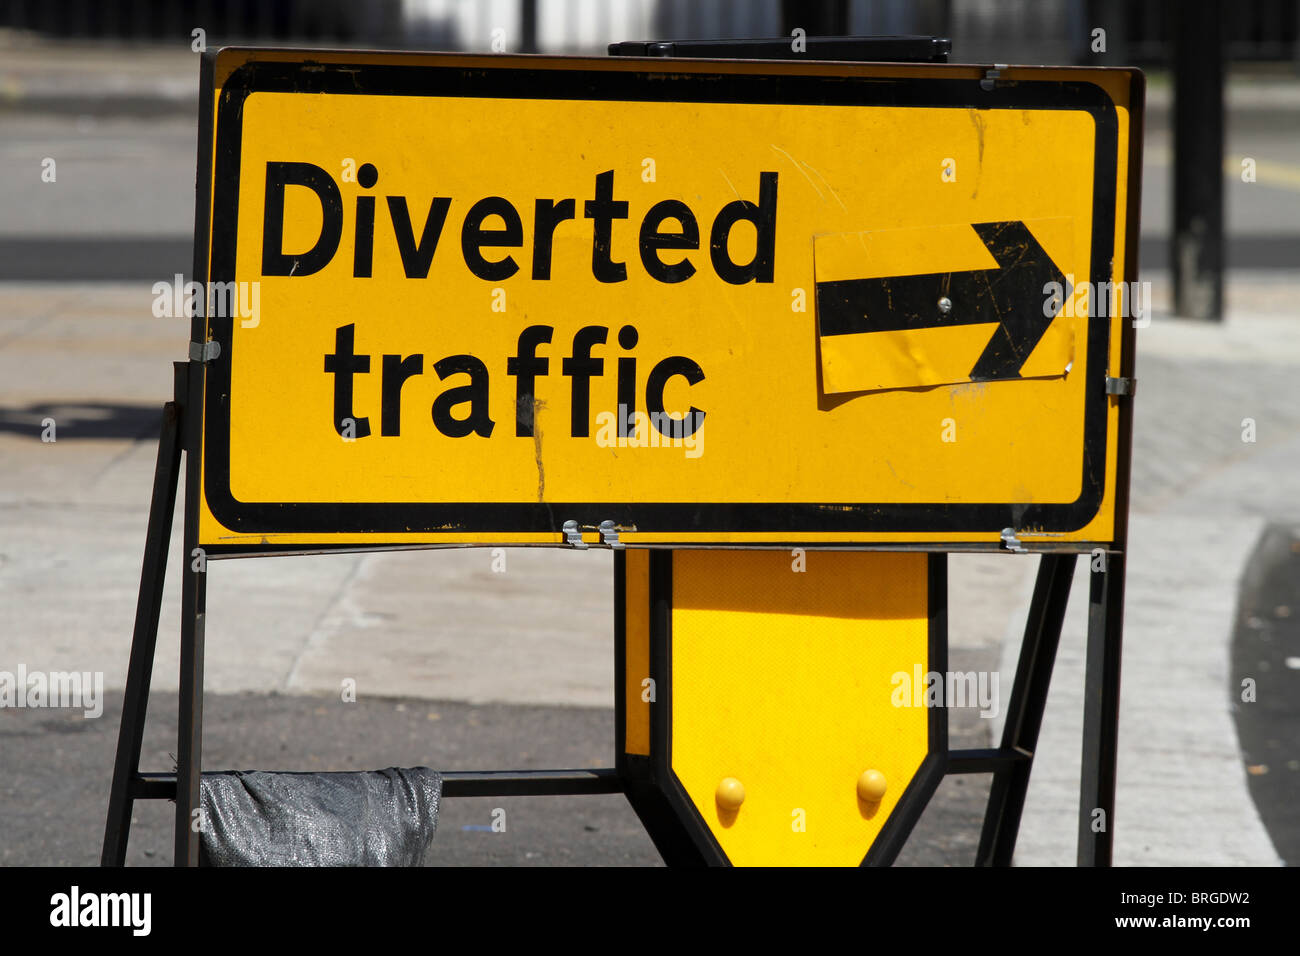 Diverted Traffic diversion sign, London, England Stock Photo